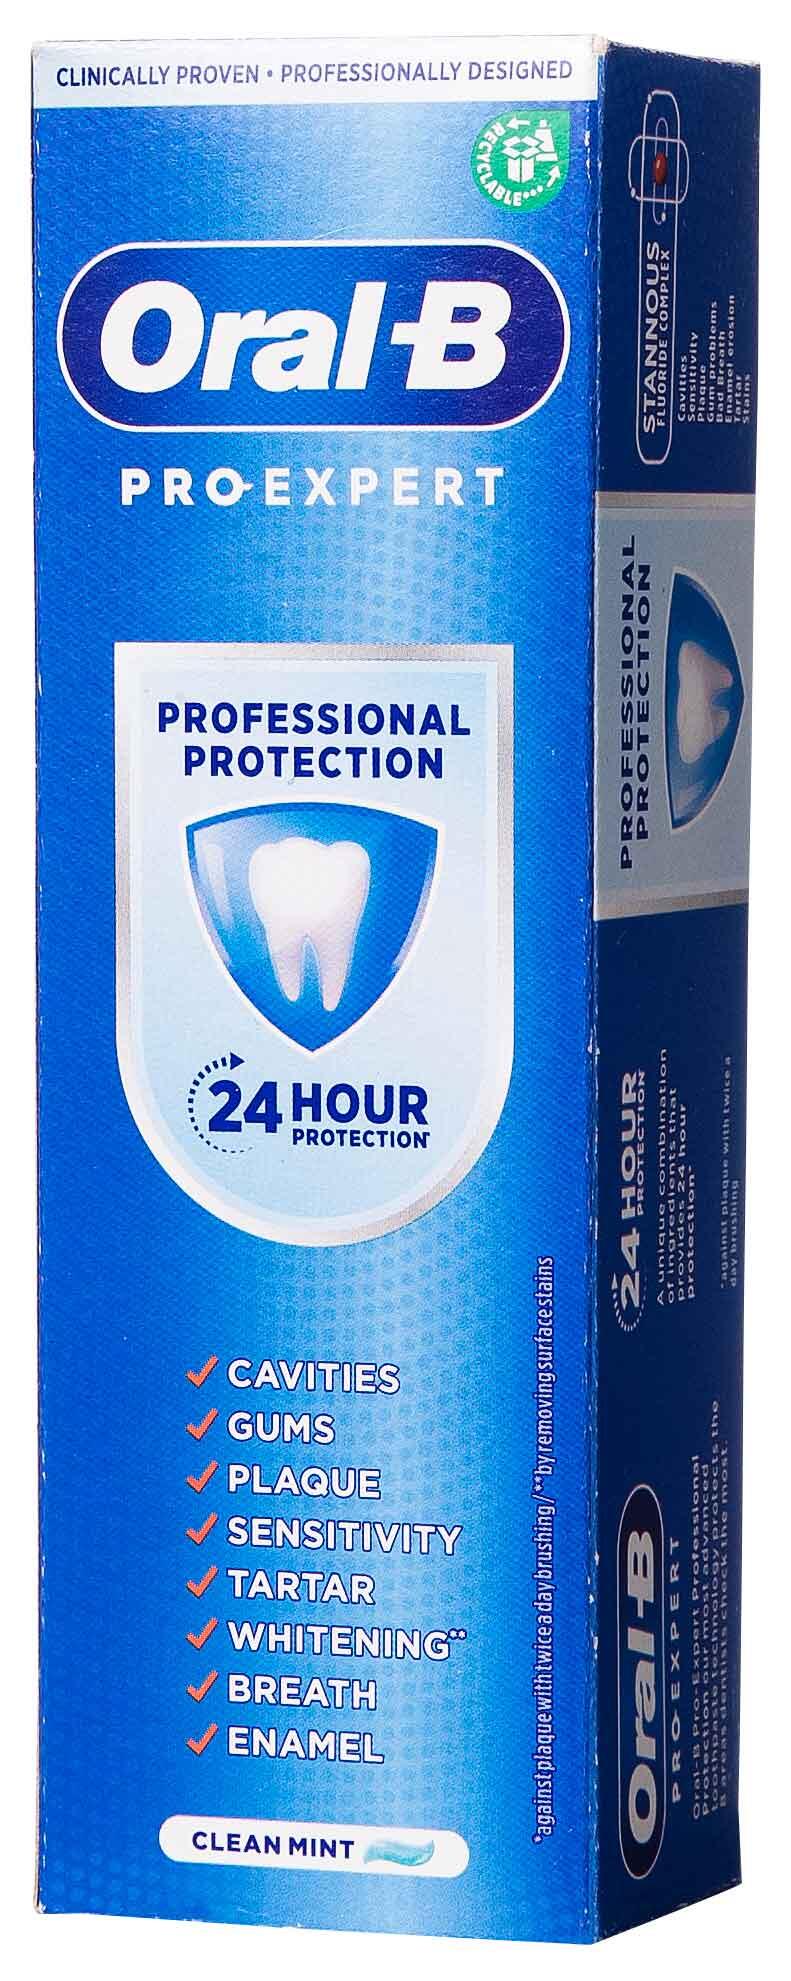 Professional Protection Oral-B